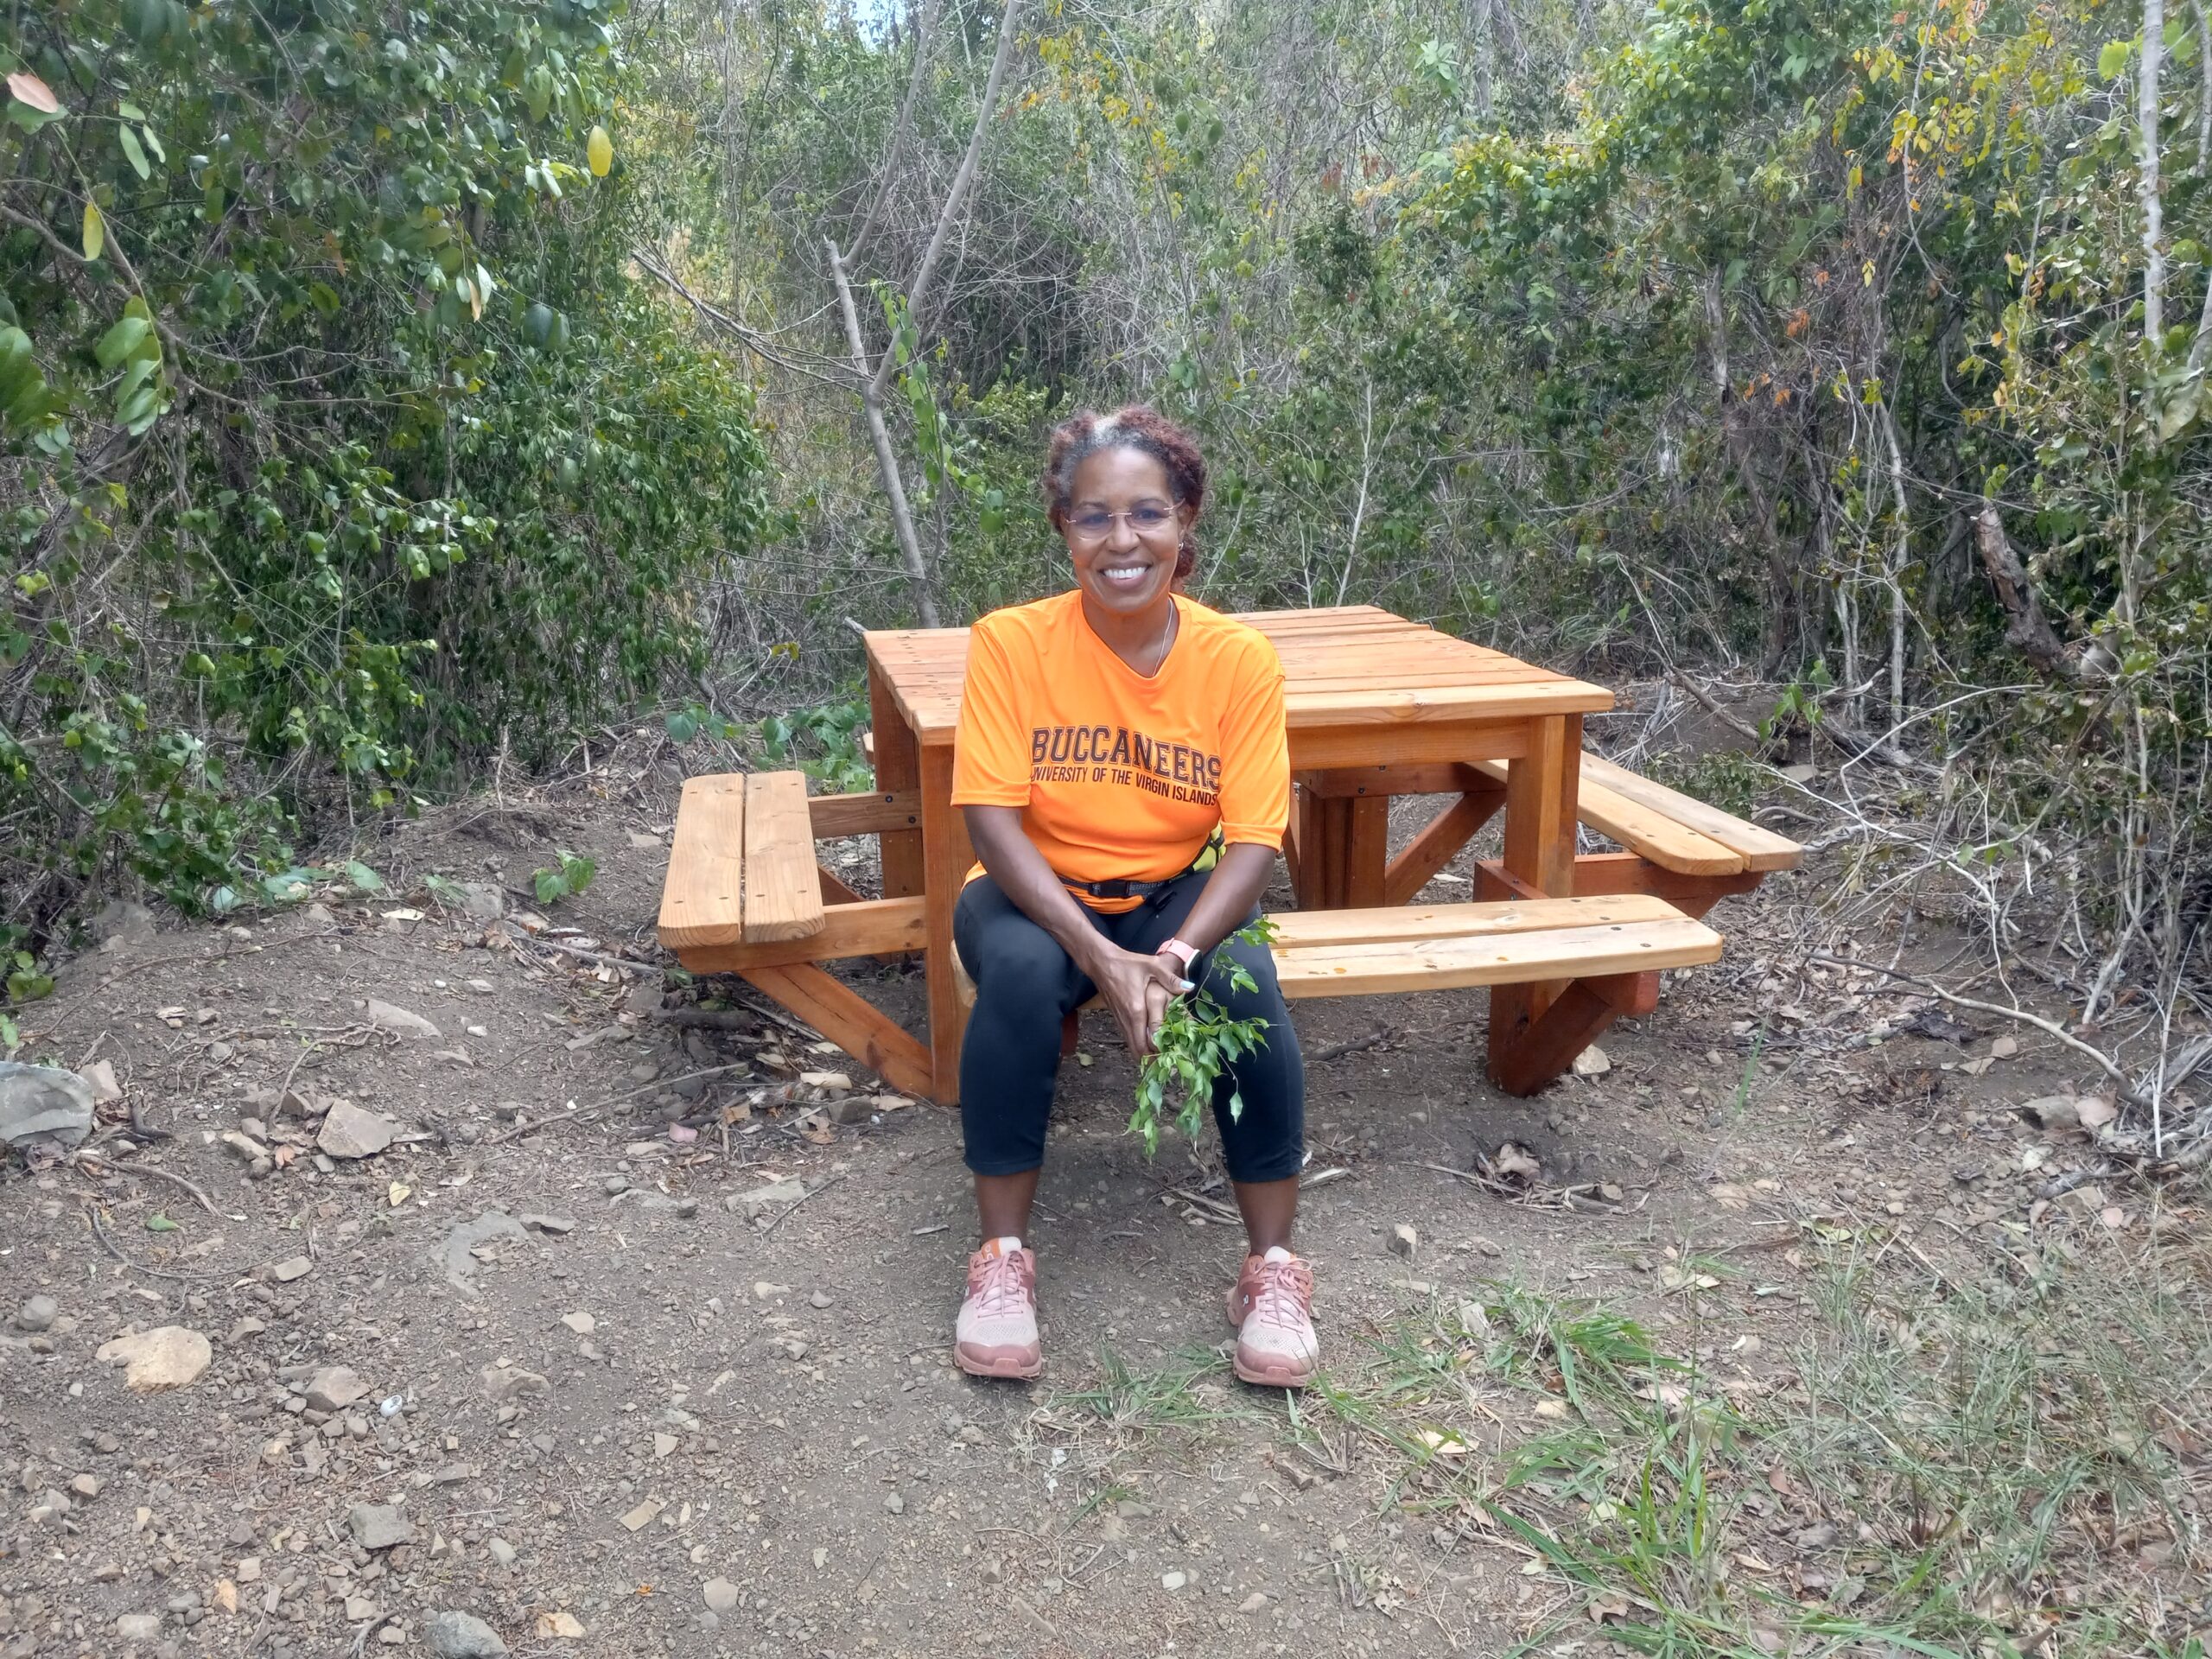 Lisa Doward, a Crucian is an descended of Fanny’s 1979, her African great, great, great grandmother through the linage of George Washington. Dhe is the niece of Gerard’s Doward and daughter of the late Augustin Adolphus Doward, a distinguished Crucian Legislator. (Photo by Olasee Davis)